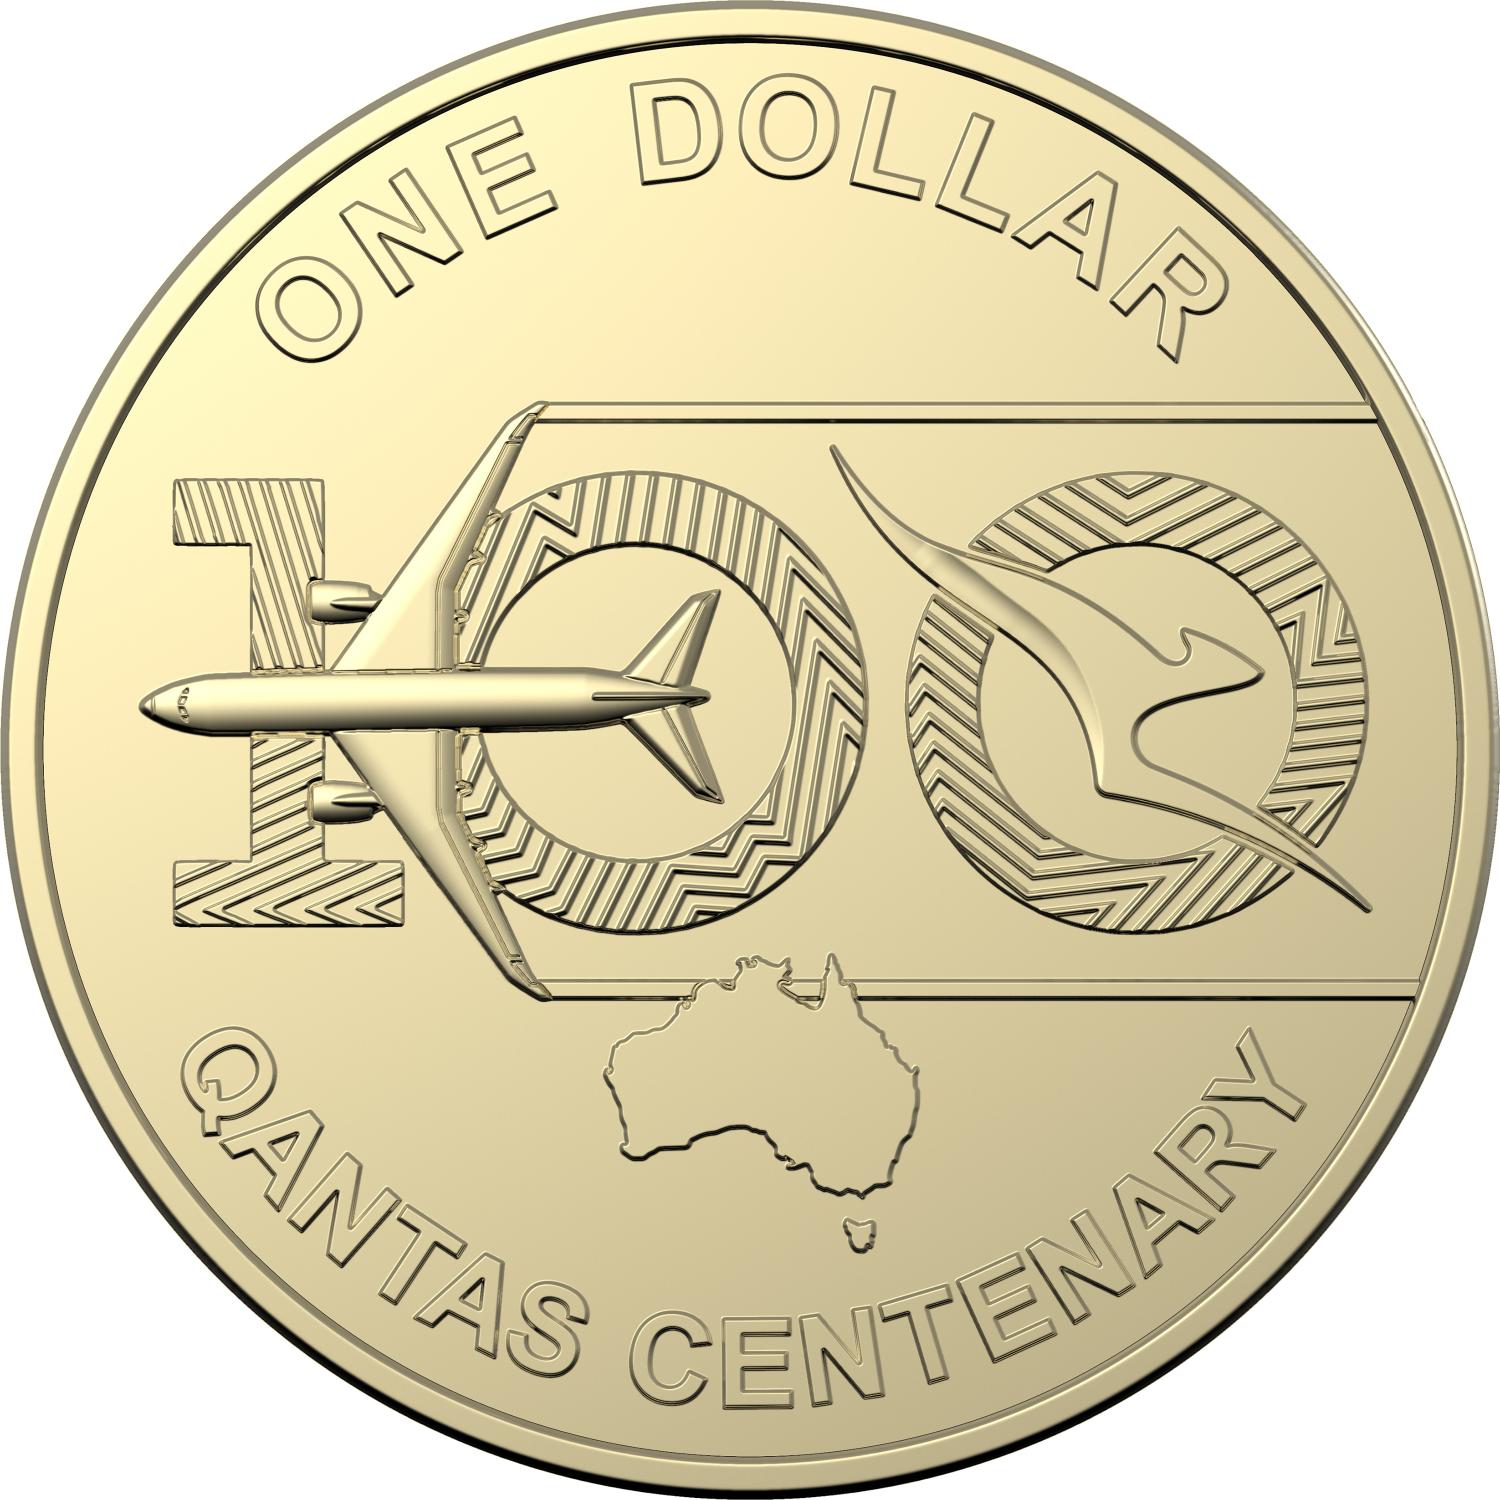 Thumbnail for 2020 Qantas $1.00 Rolled Coin - Royal Australian Mint Roll of 20 Coins